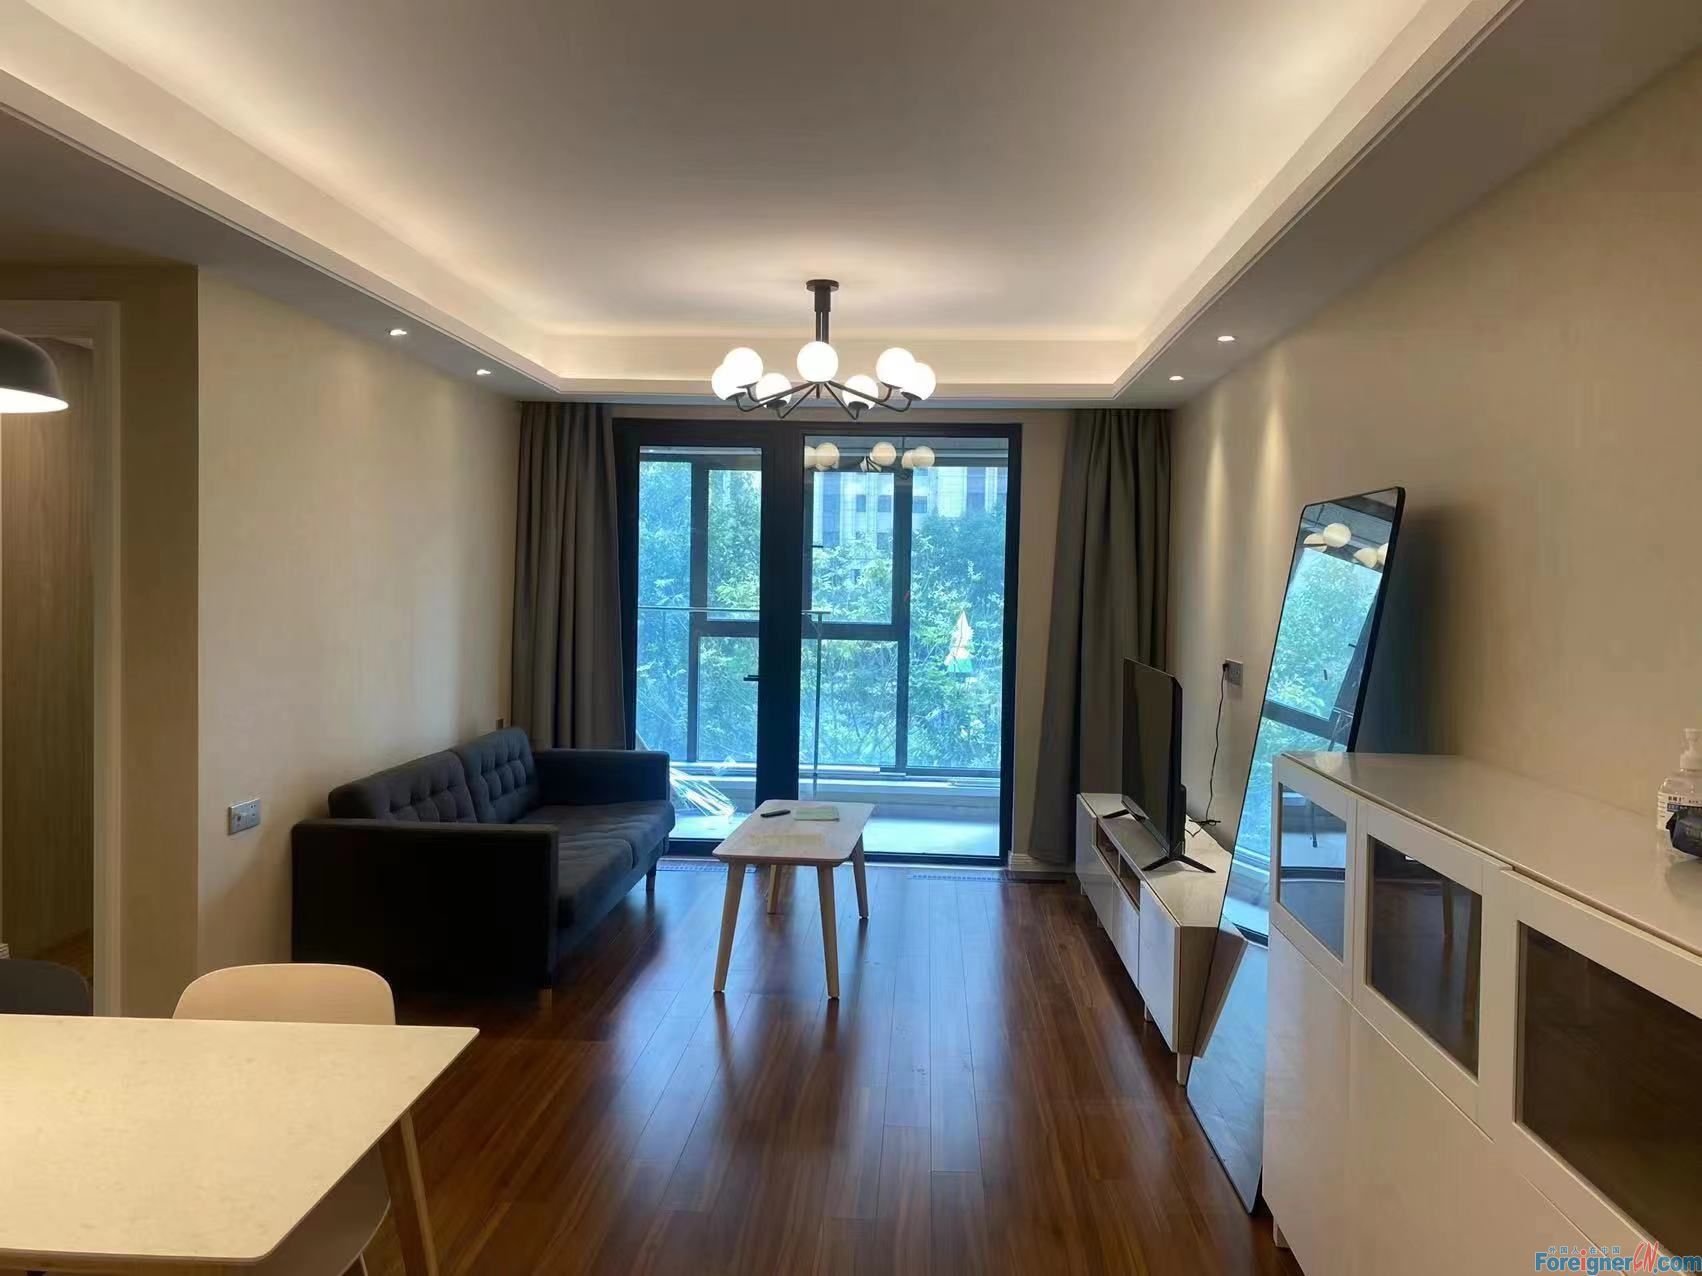 Wow!!!! brand new apartment rent in Suzhou/ 3 bedrooms and 2 bathrooms/central AC/cozy and clean rooms/ Eton House international school/subway station 